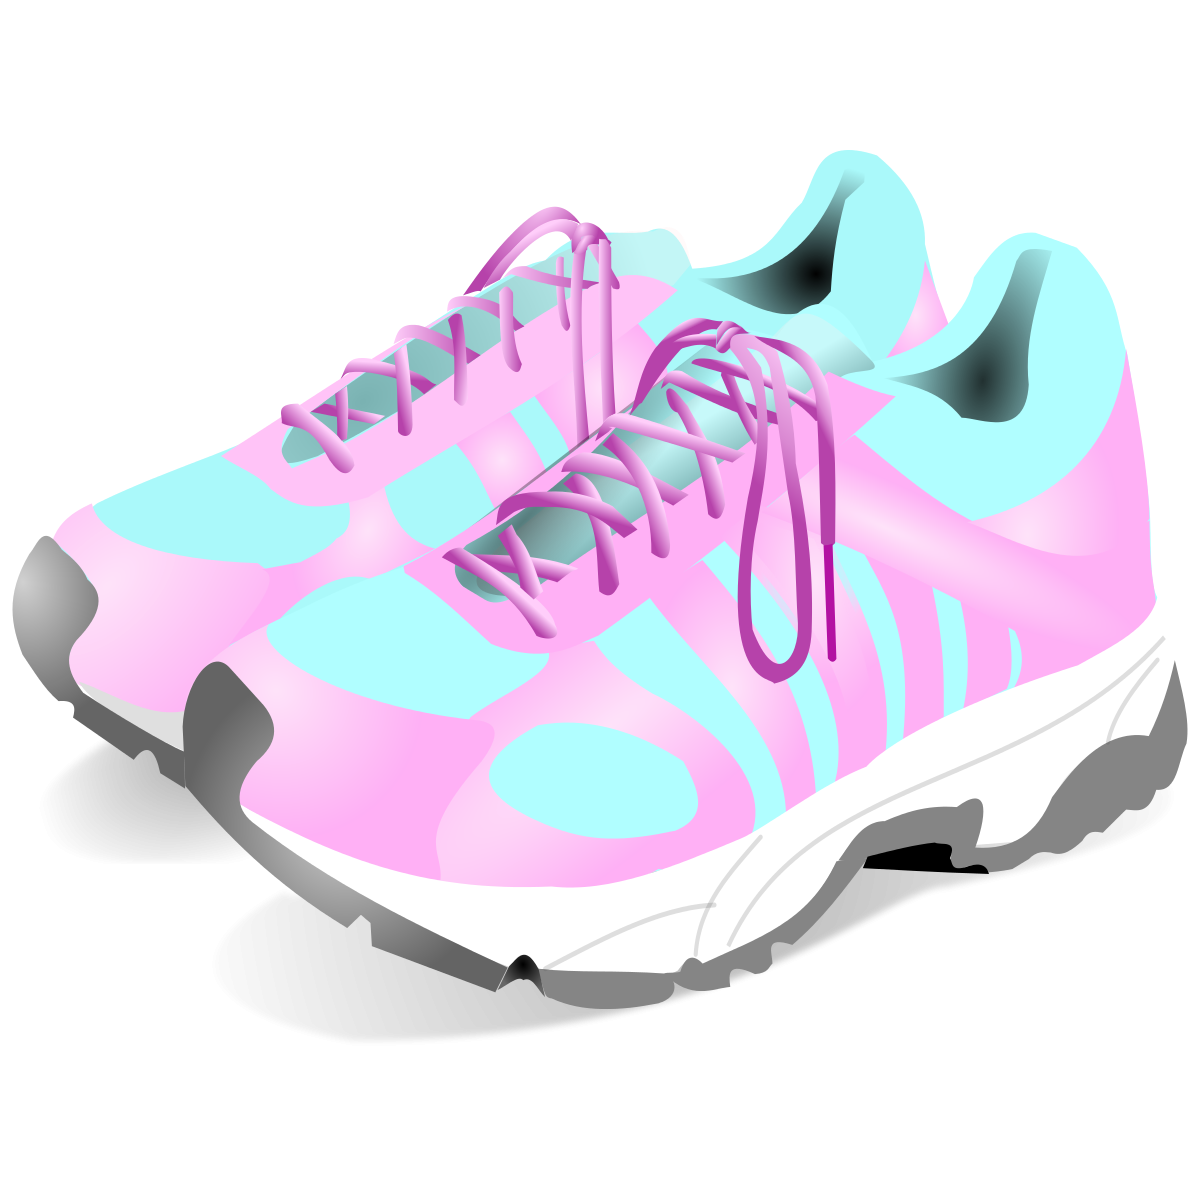 Sneakers Clipart by frankes : Sport Cliparts #19336- ClipartSE